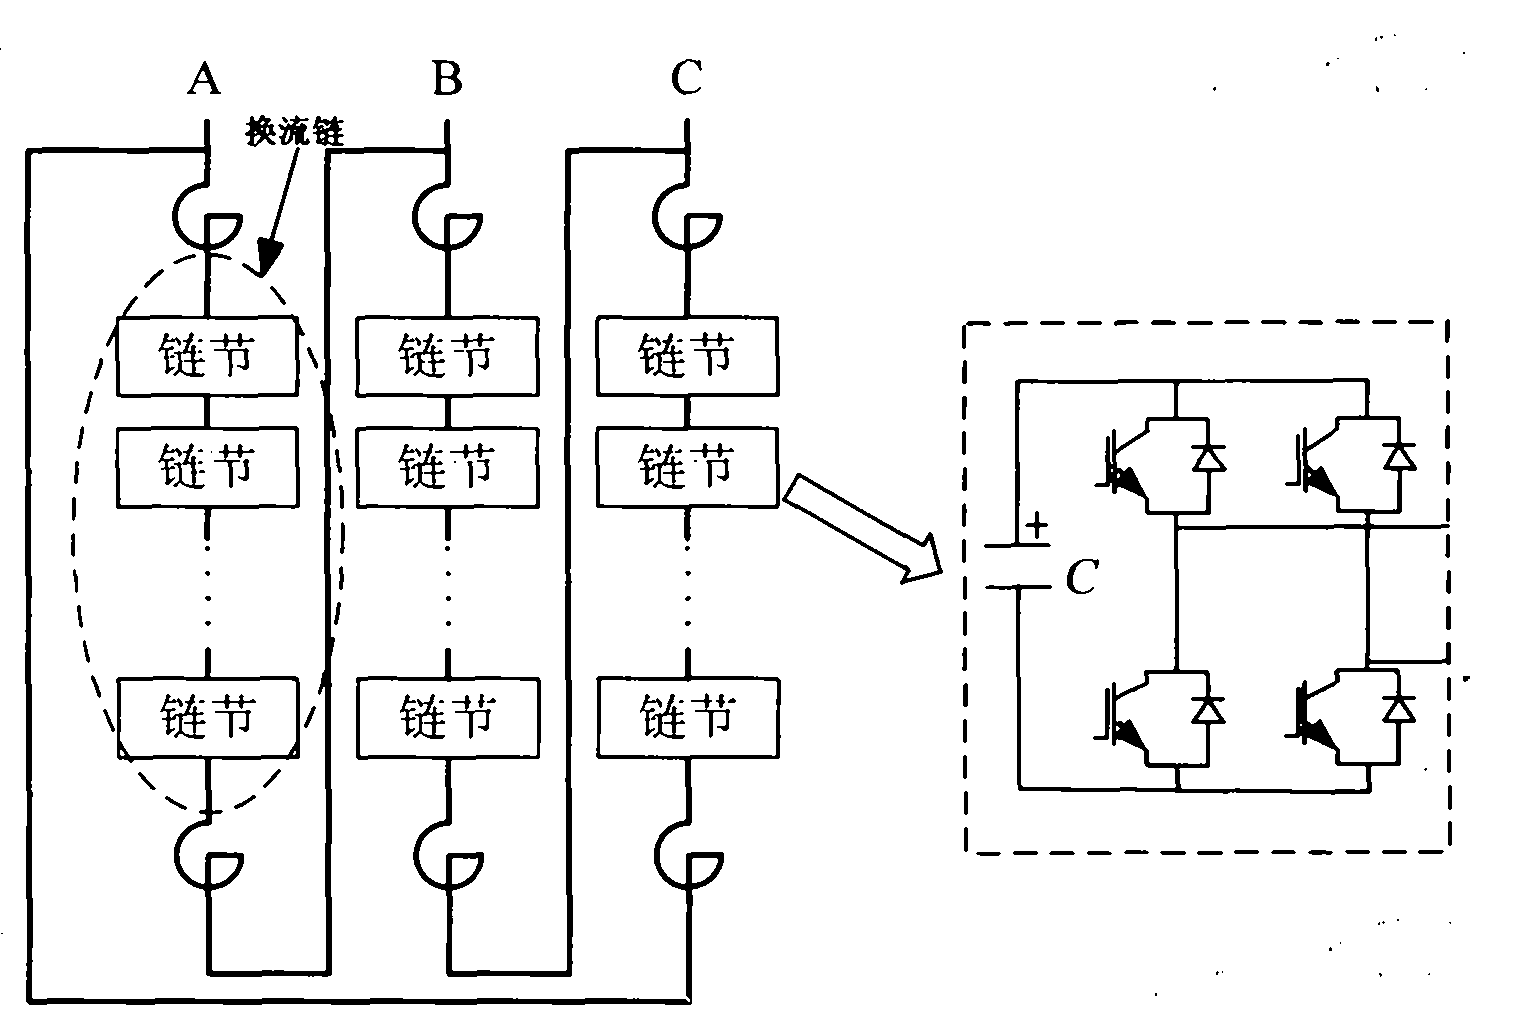 Chain type STATCOM (Static Synchronous Compensator) chain unit bypass structure with mechanical switch